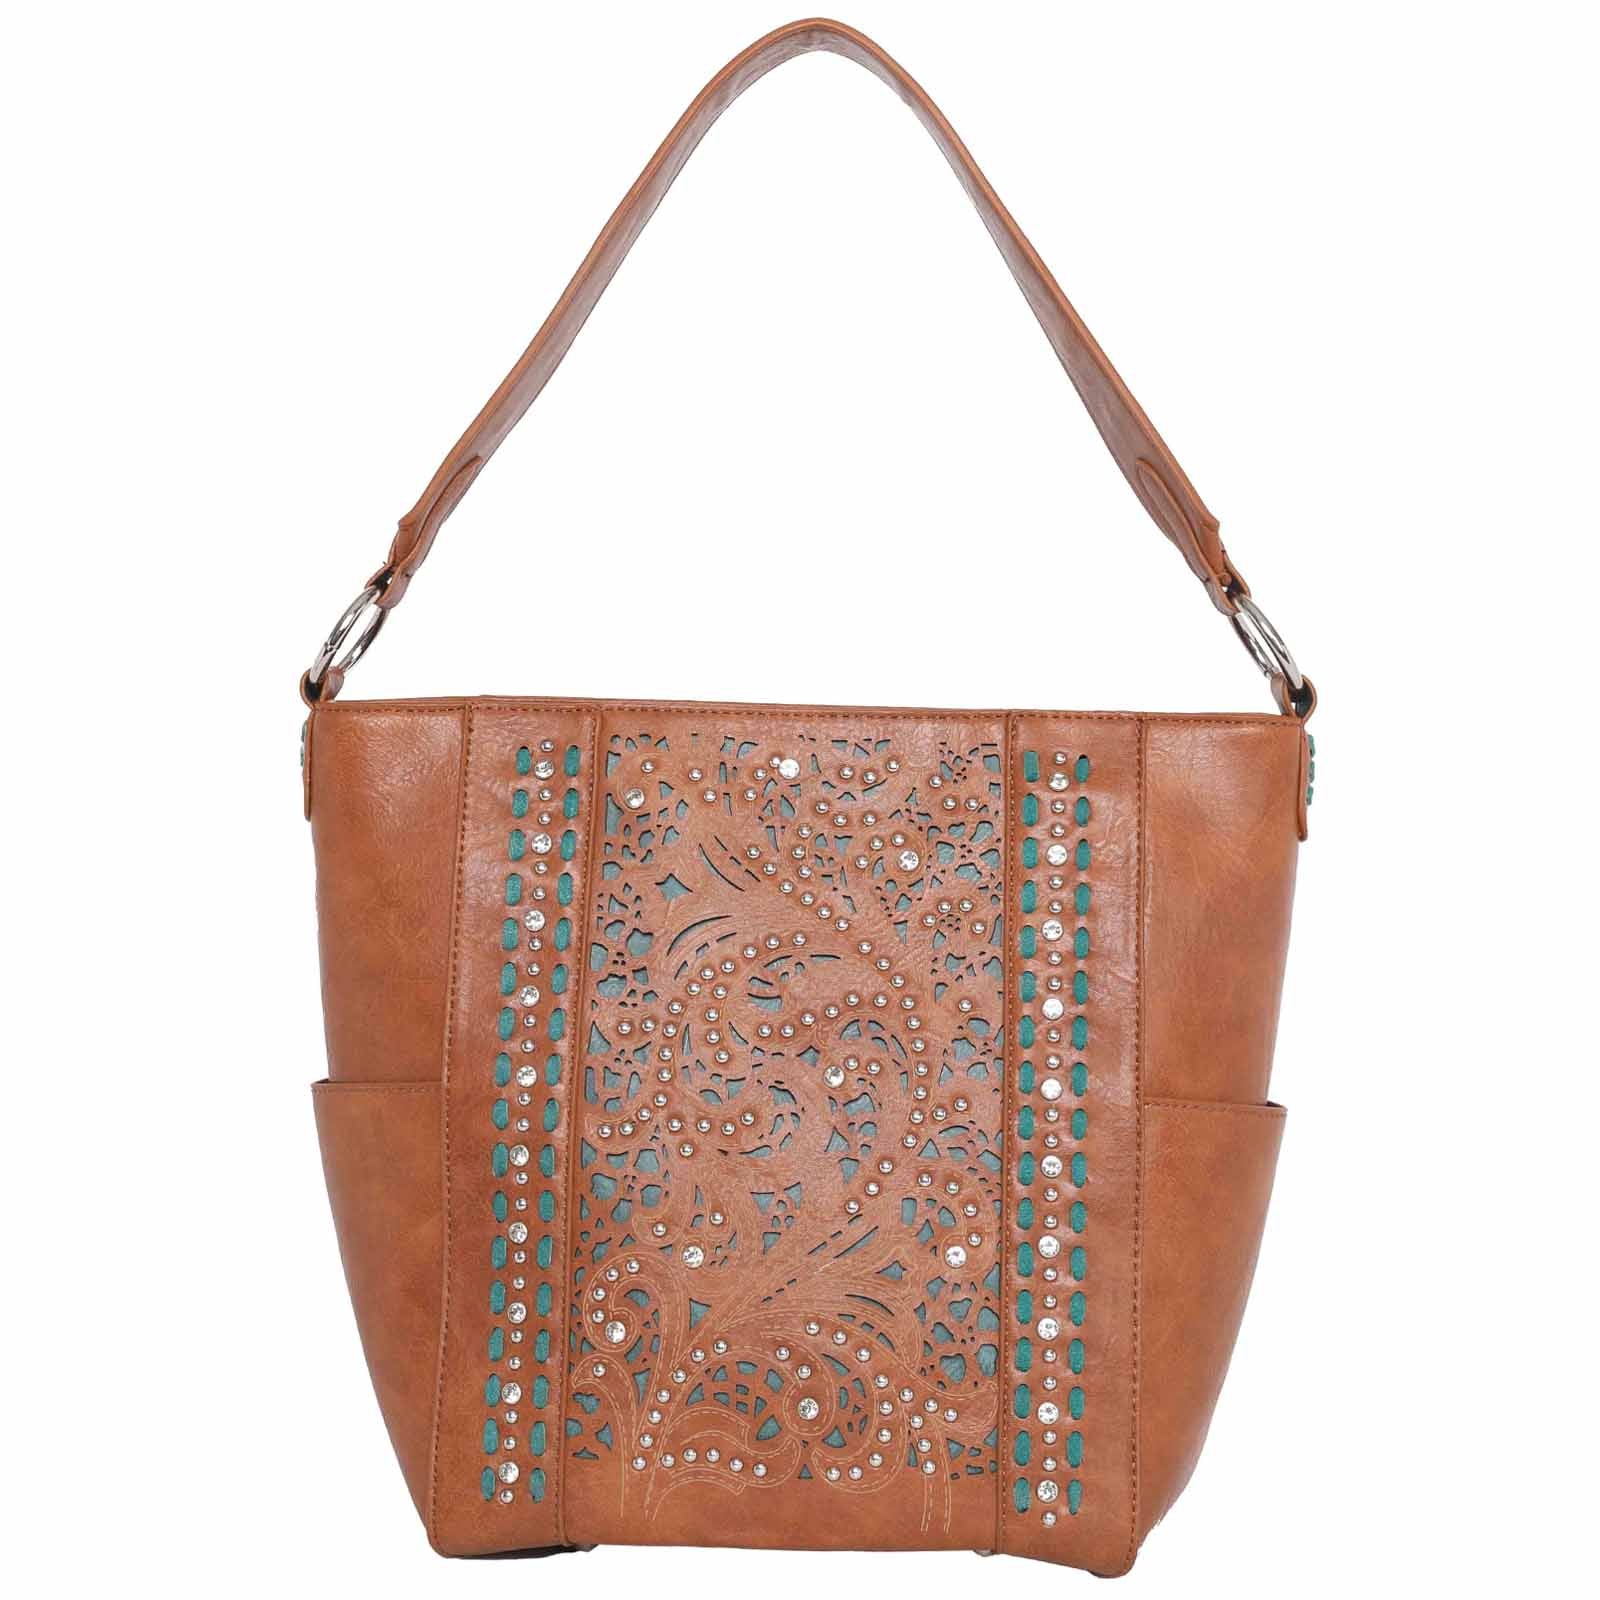 Montana West Vintage Floral Cut-Out Hobo